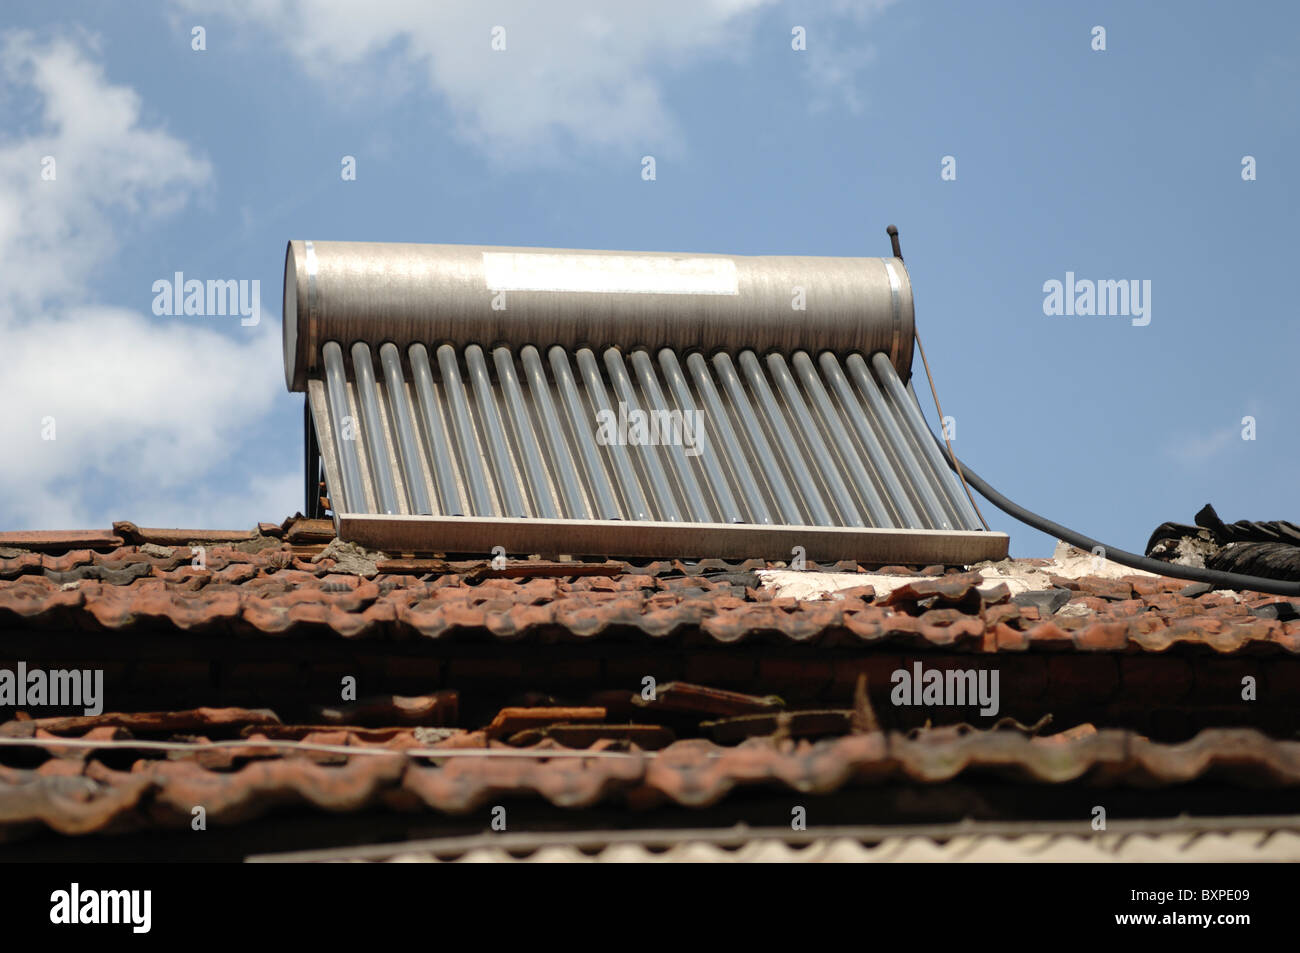 A n environmentally friendly solar water heater on the tiled roof of a house in Yangzhou Jiangsu Province of China Stock Photo